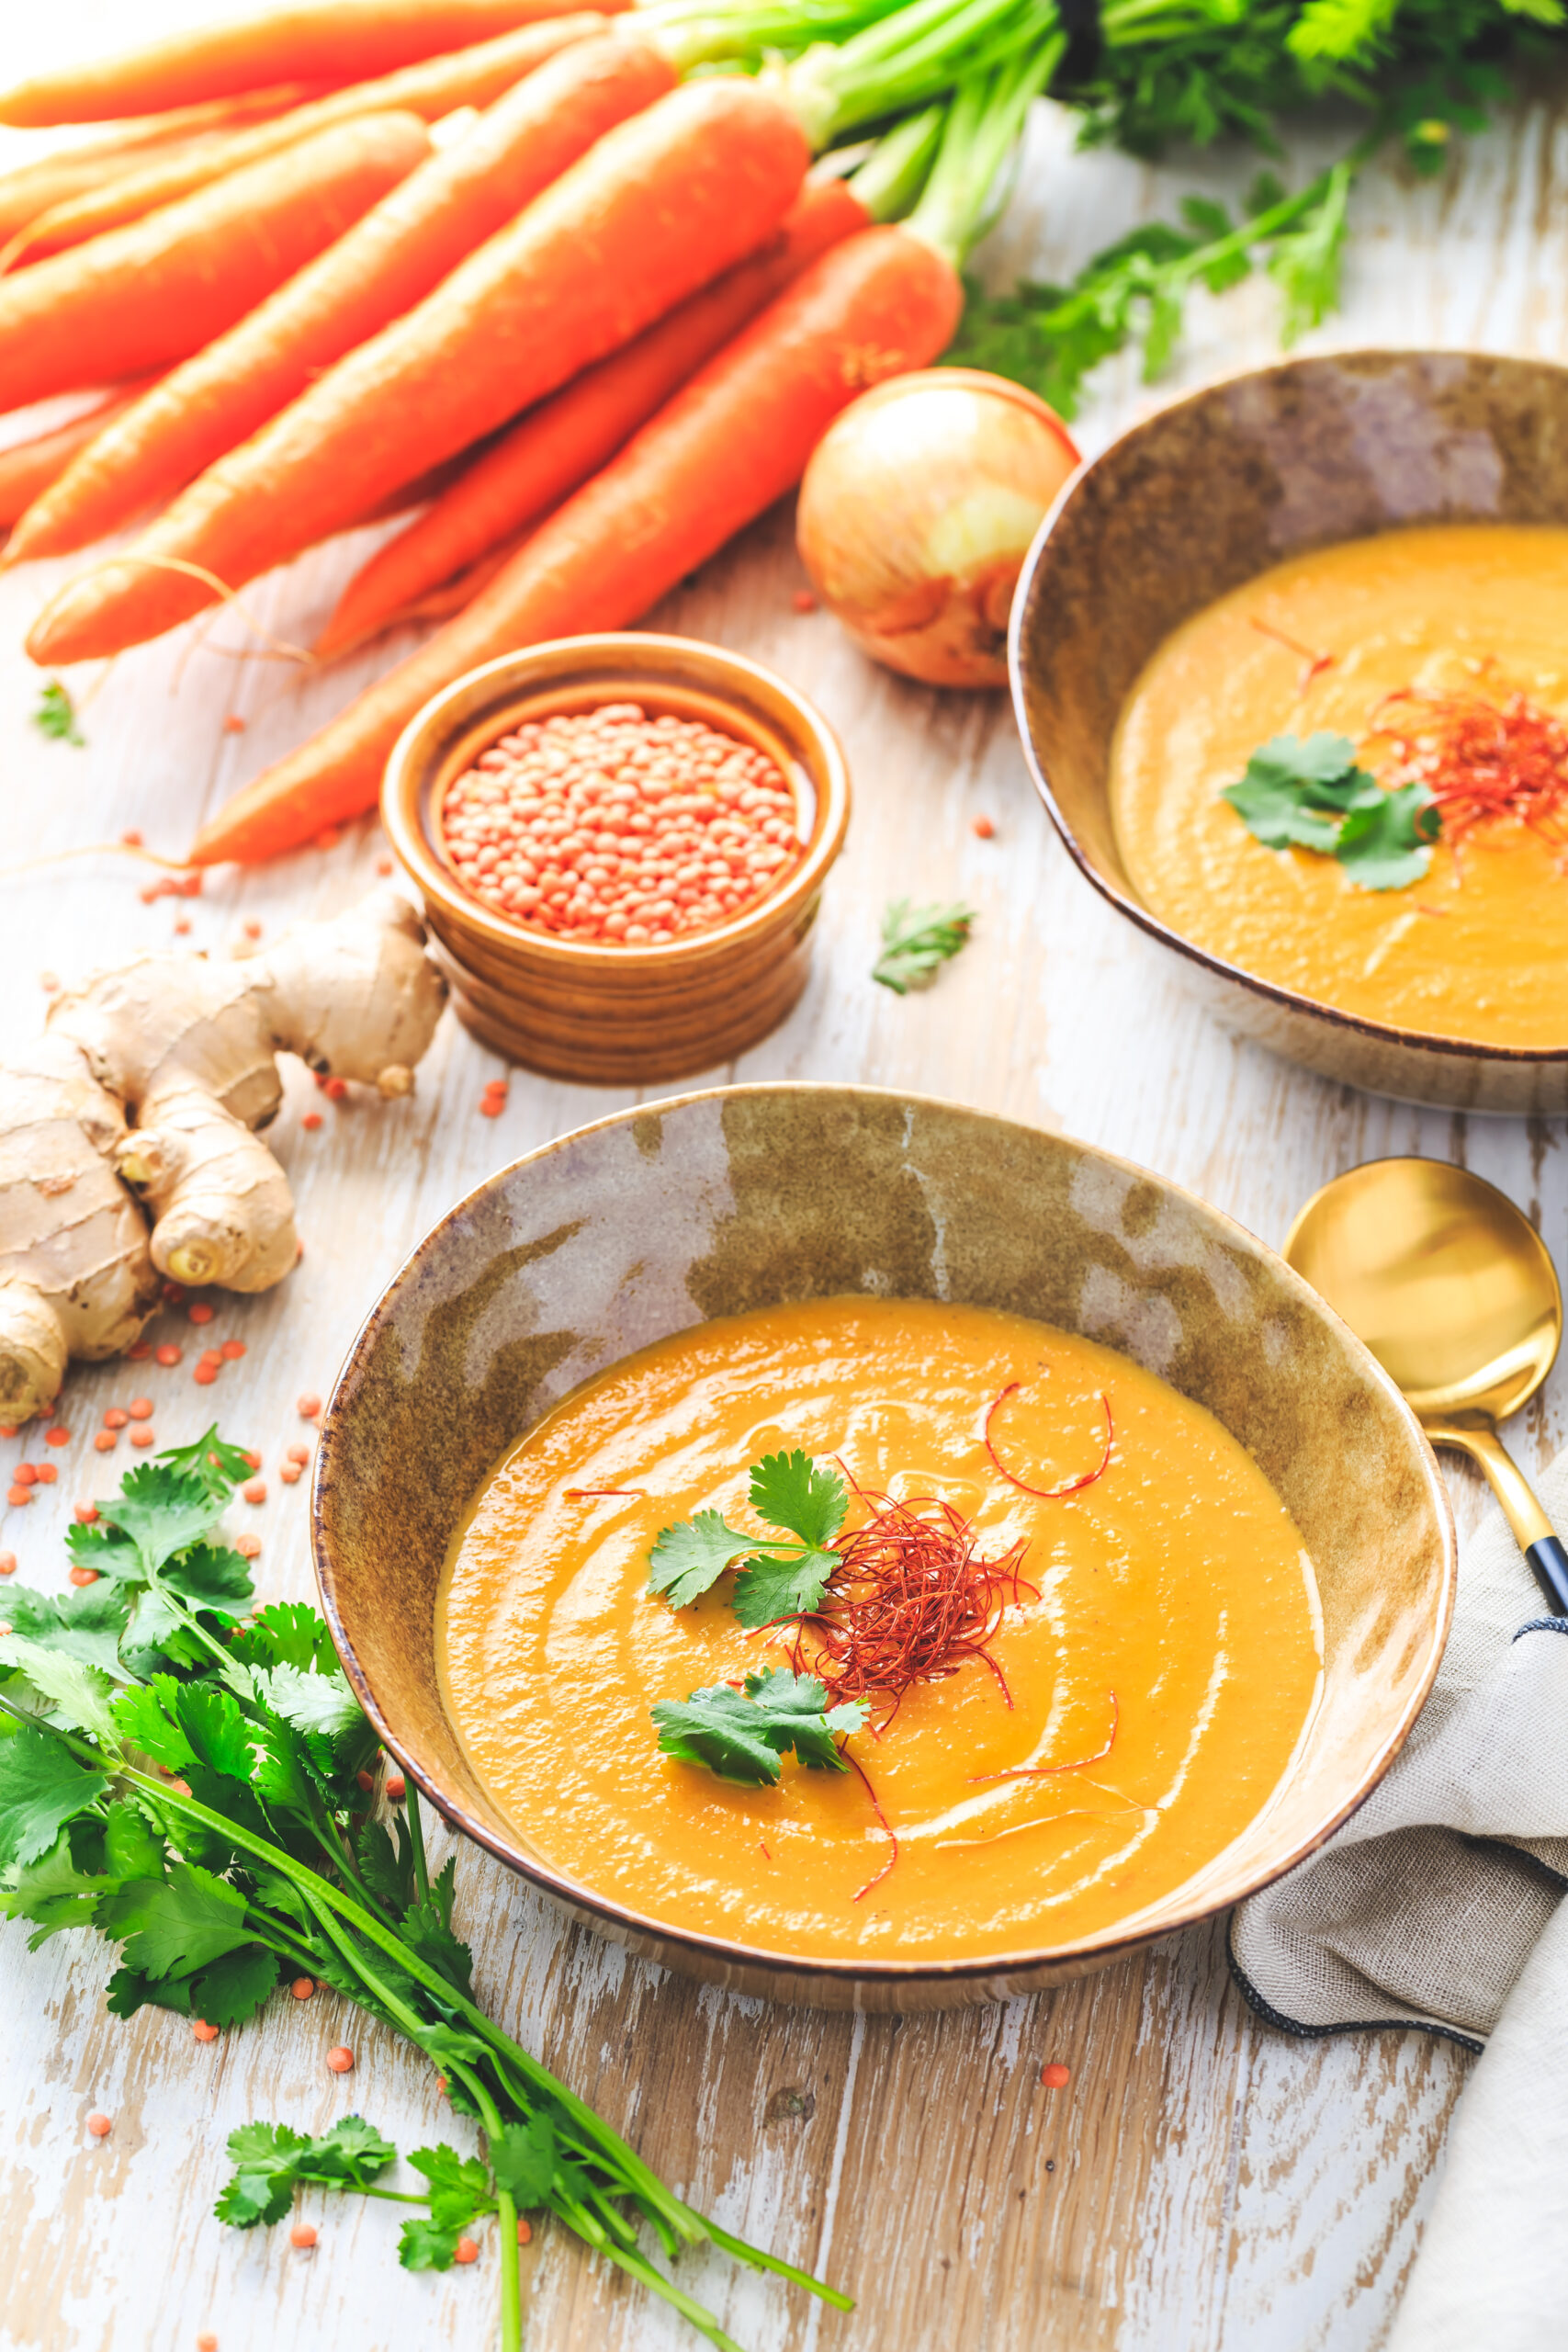 Spiced Carrot and Lentil Soup | Slimming World Friendly Recipe